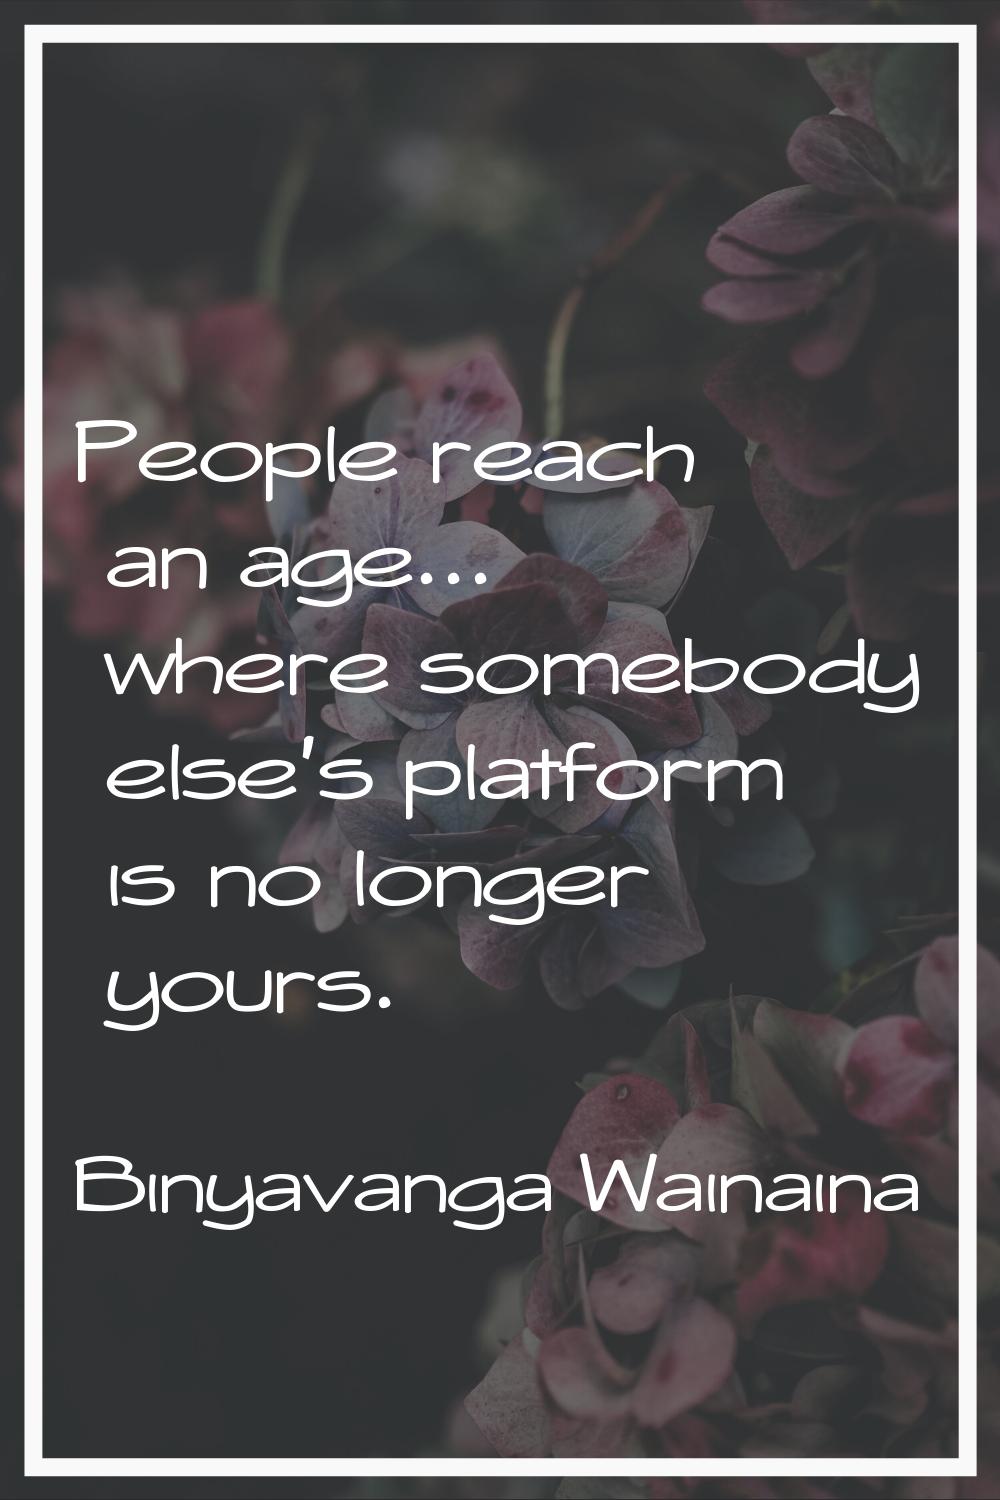 People reach an age... where somebody else's platform is no longer yours.